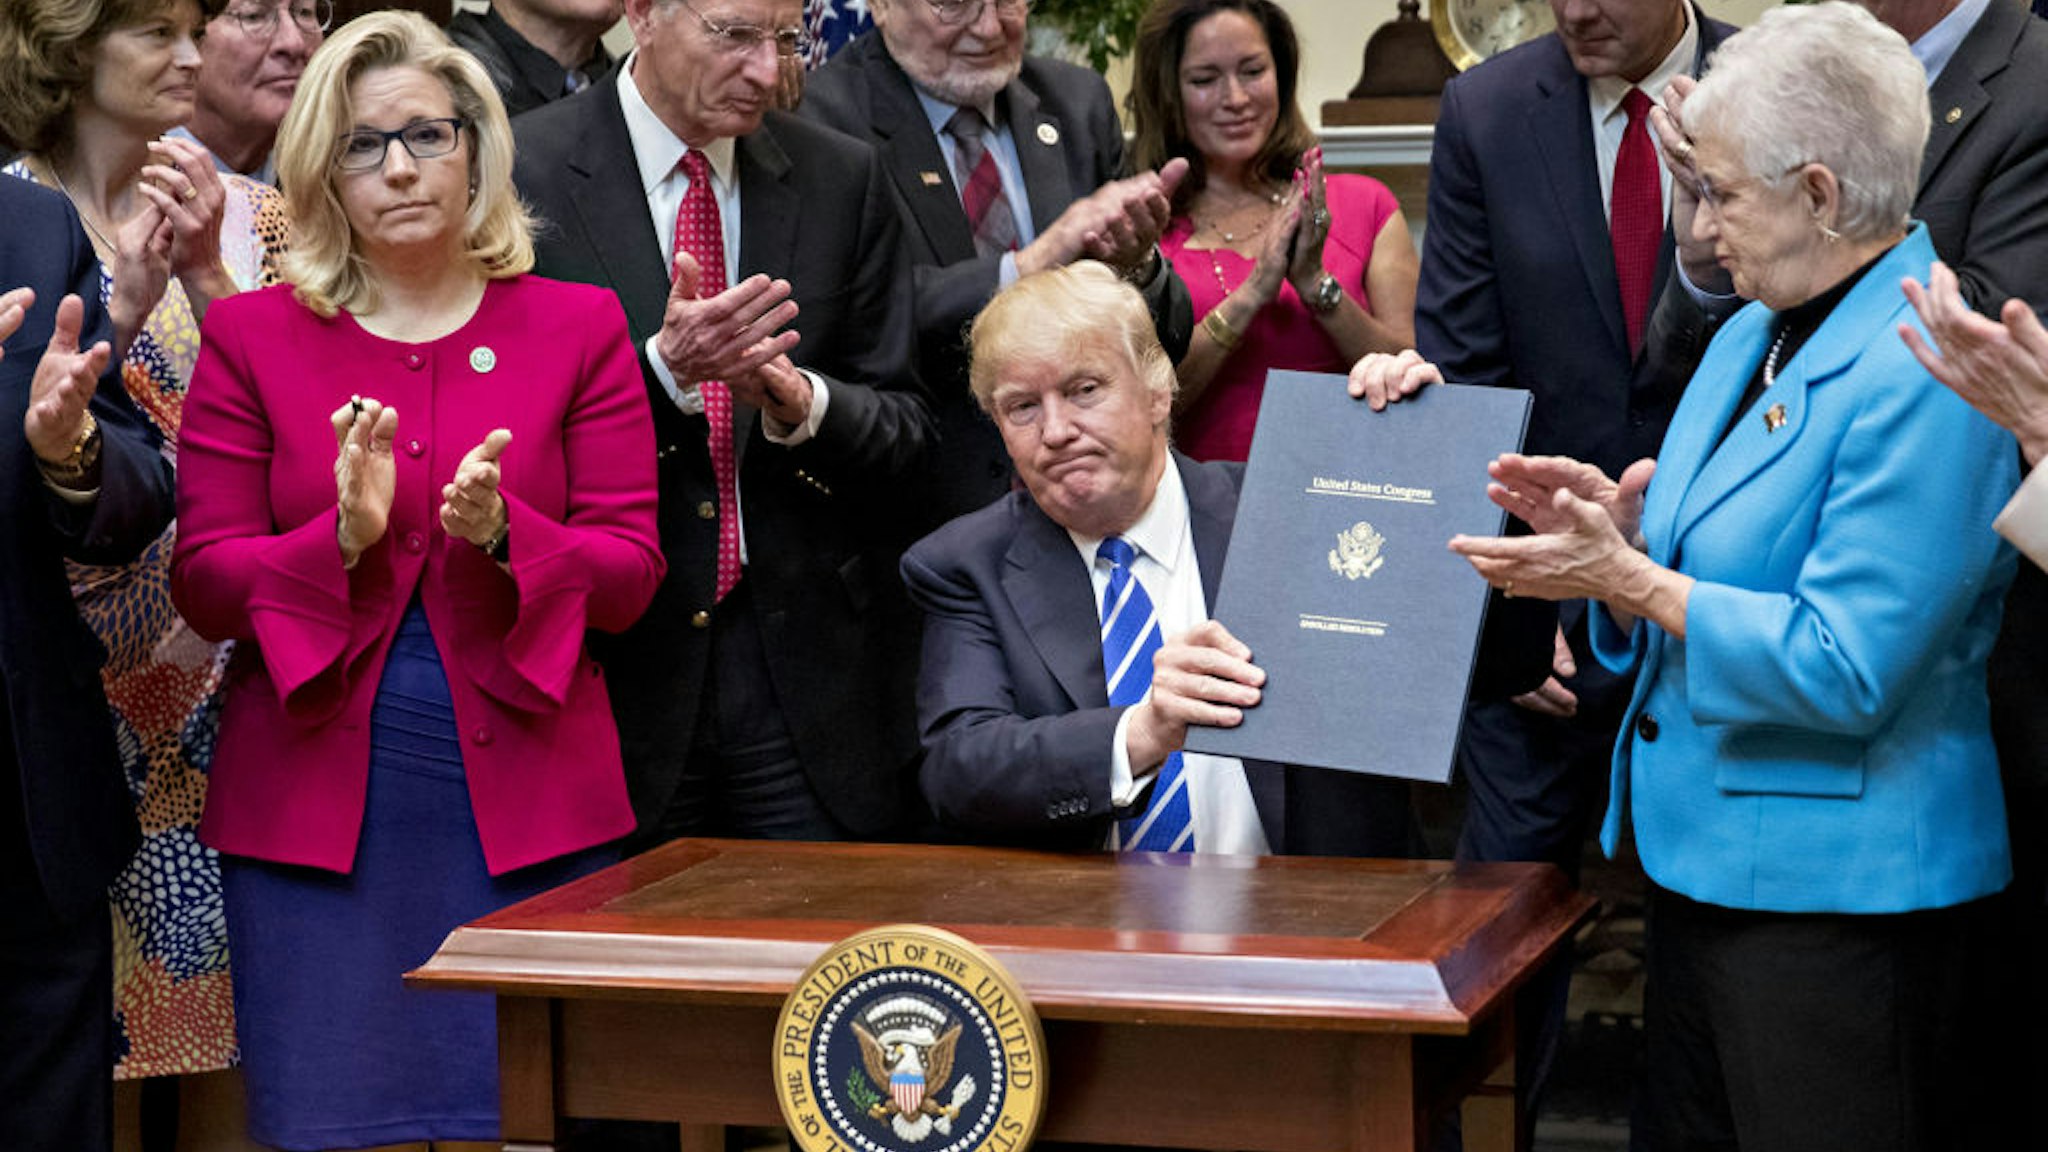 U.S. President Donald Trump holds up H.J. Res. 58, which overturns a rule requiring states to report specific information on teacher preparation programs, such as student learning outcomes, and rate their effectiveness, after signing the bill during a ceremony in the Roosevelt Room of the White House in Washington, D.C., U.S., on Monday, March 27, 2017. Trump signed four bills, H.J. Res 37, H.J. Res 44, H.J. Res. 57 and H.J. Res. 58, that nullify measures put in place during former President Obama's administration.